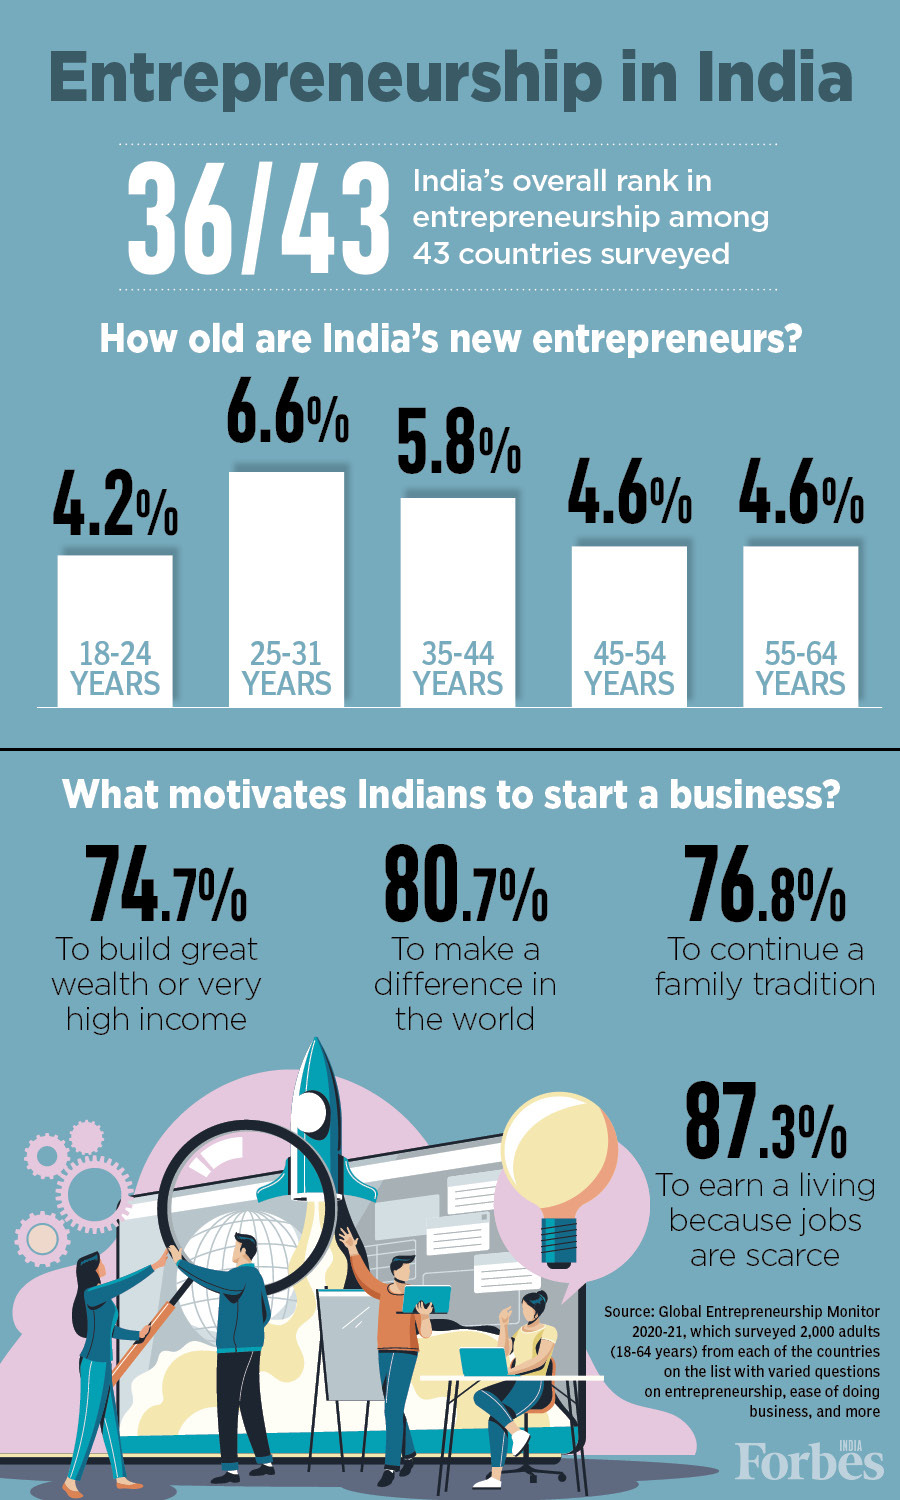 Women in entrepreneurship: India ranks in the bottom 3 out of 43 countries surveyed